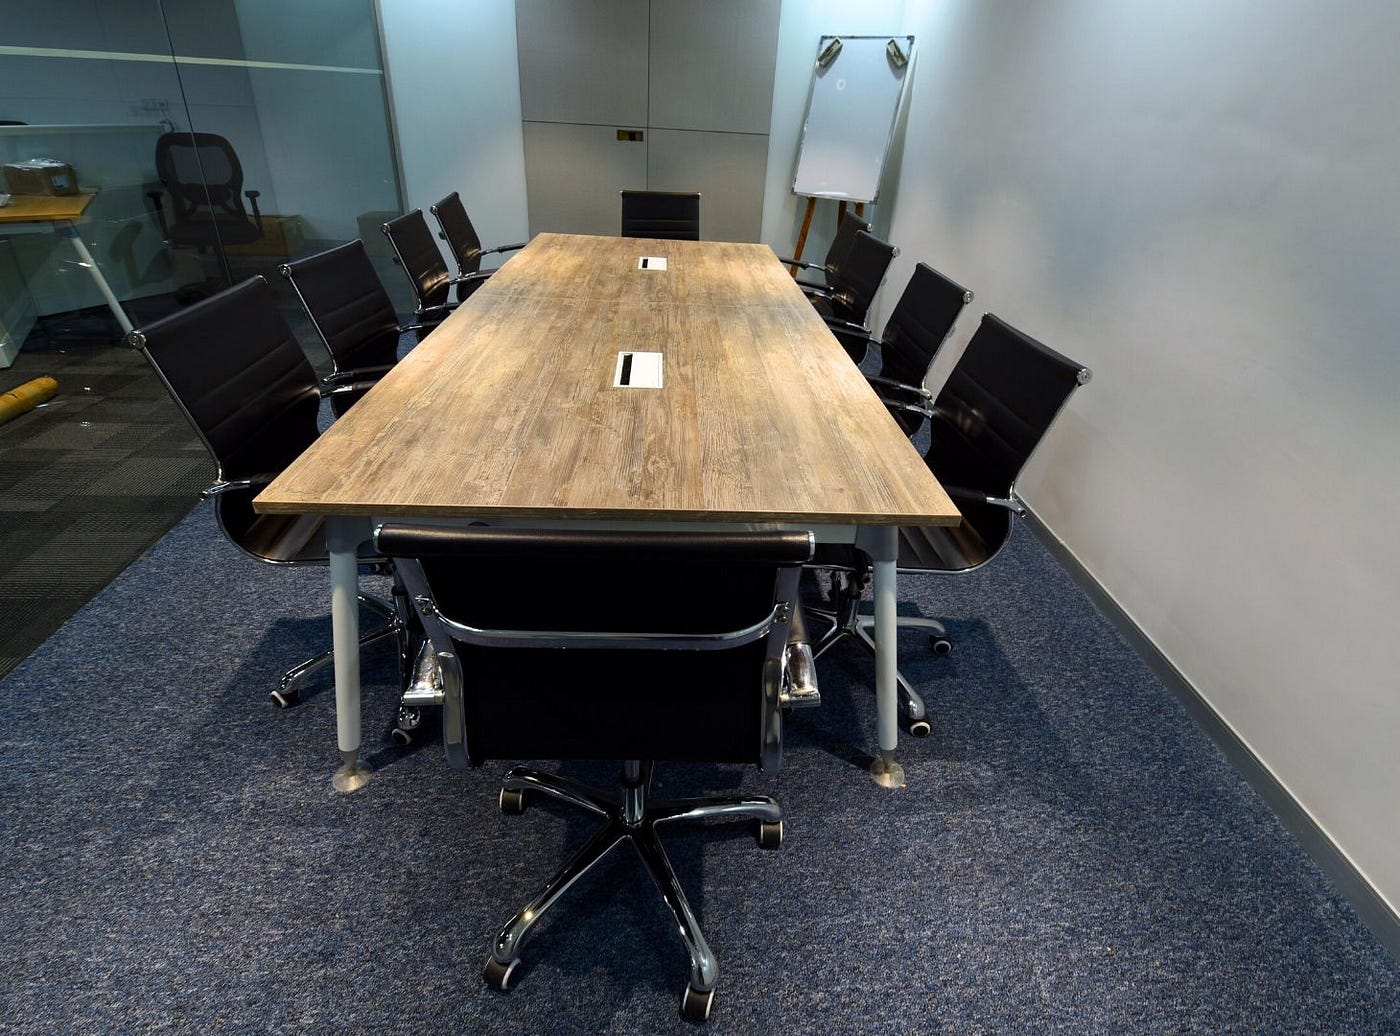 Flexibility and Productivity with the Kissen Conference Table